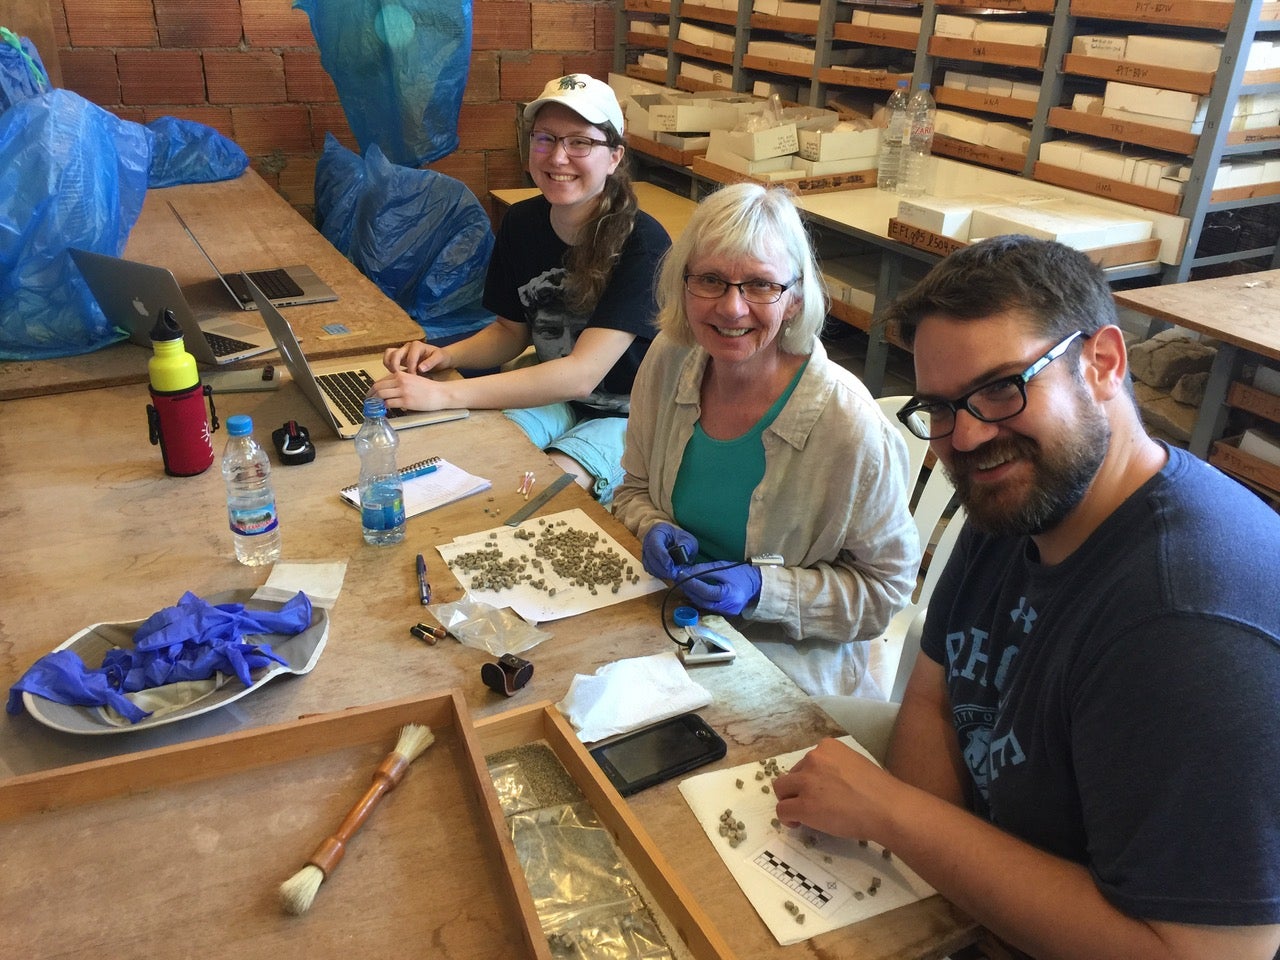 Researchers studying mosaics in Cyprus